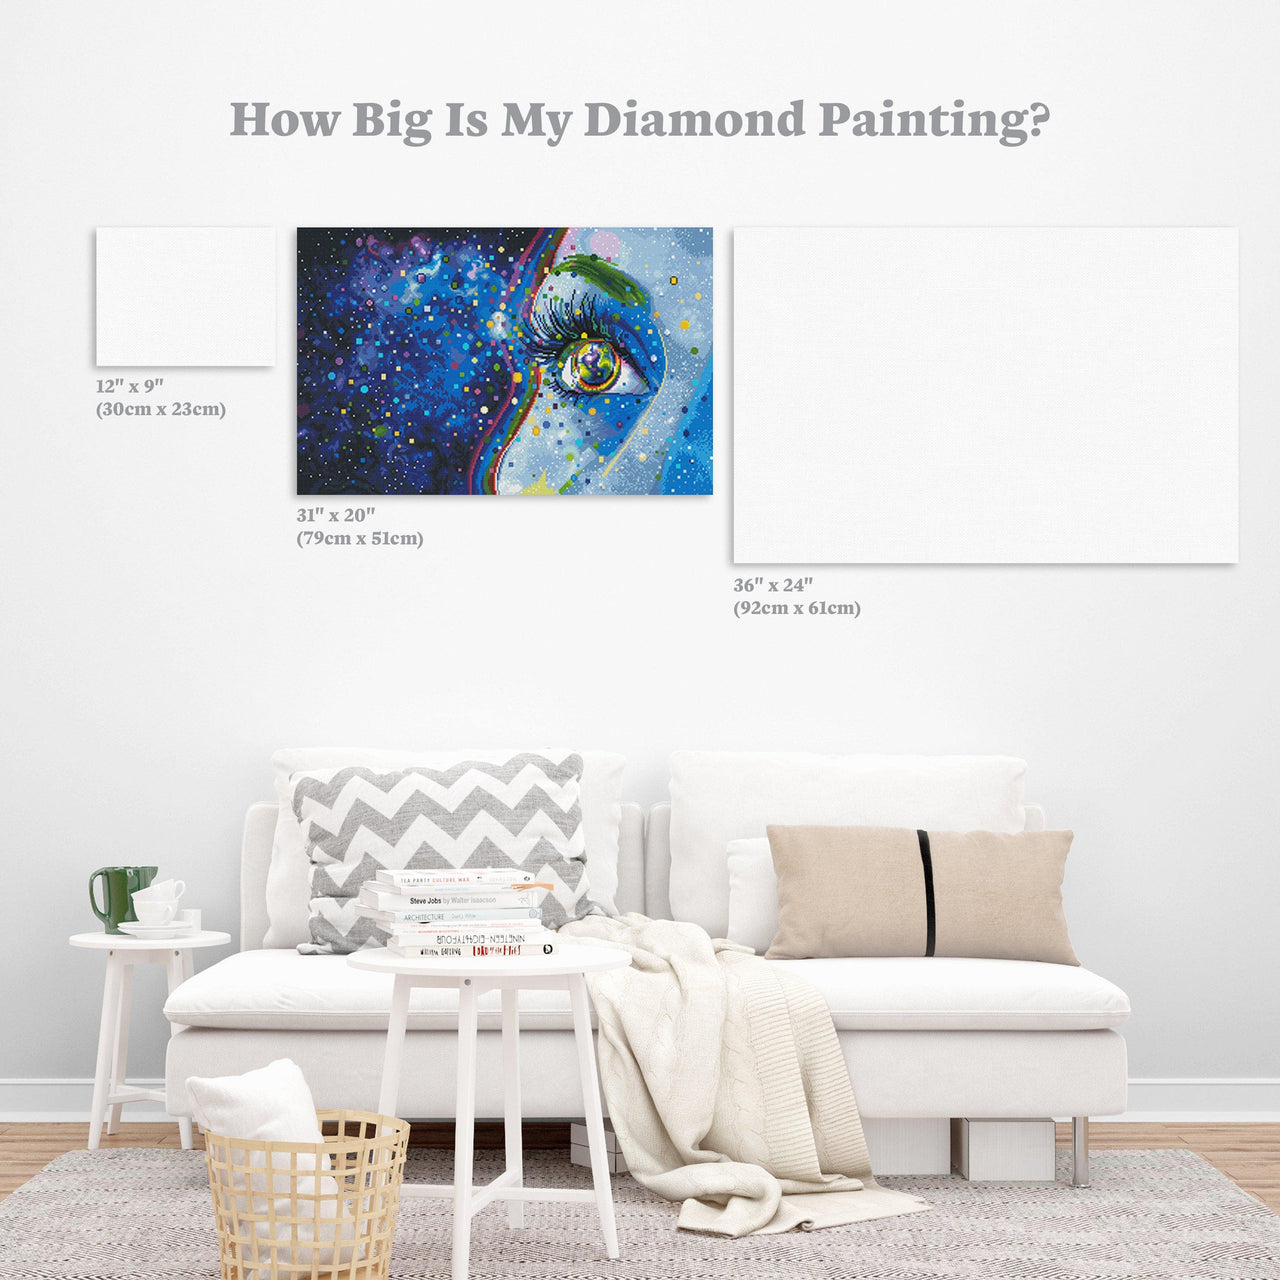 Diamond Painting Gaia 31" x 20″ (79cm x 51cm) / Round with 47 Colors including 3 ABs / 50,861